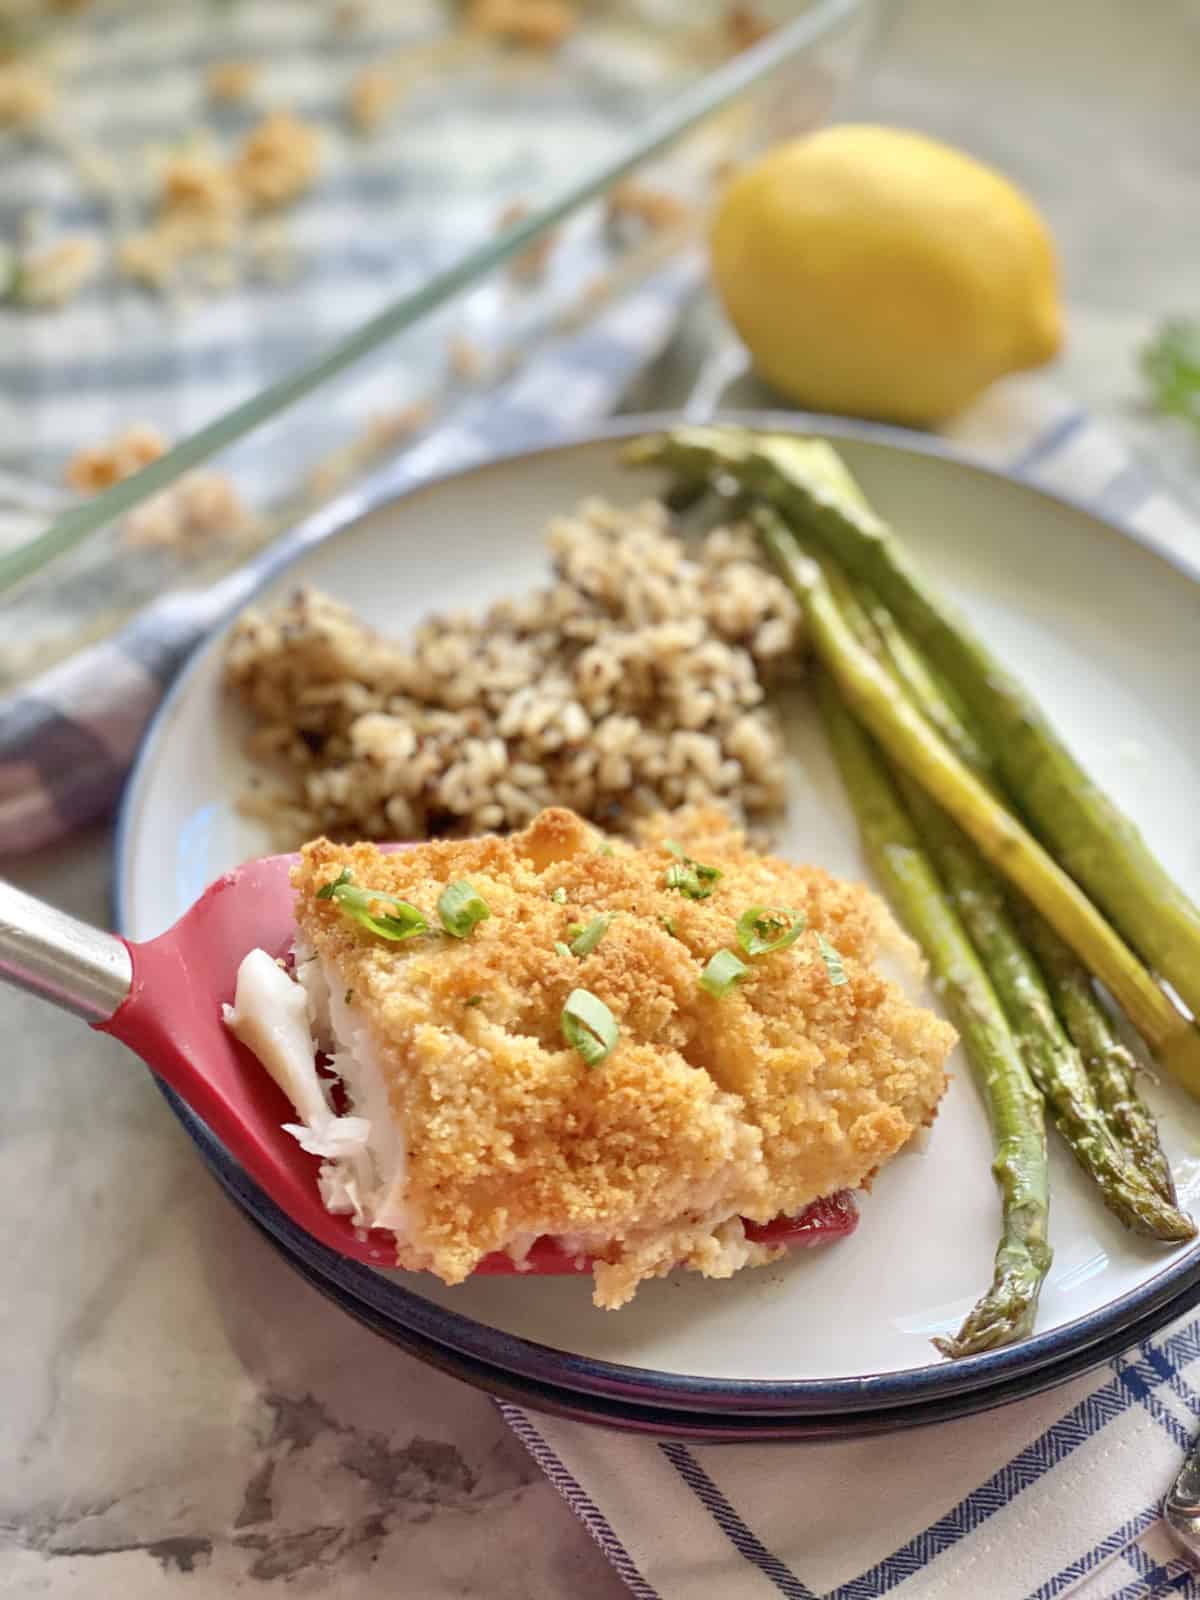 Red spatula placing a piece of breaded fish onto a plate with rice and asparagus.